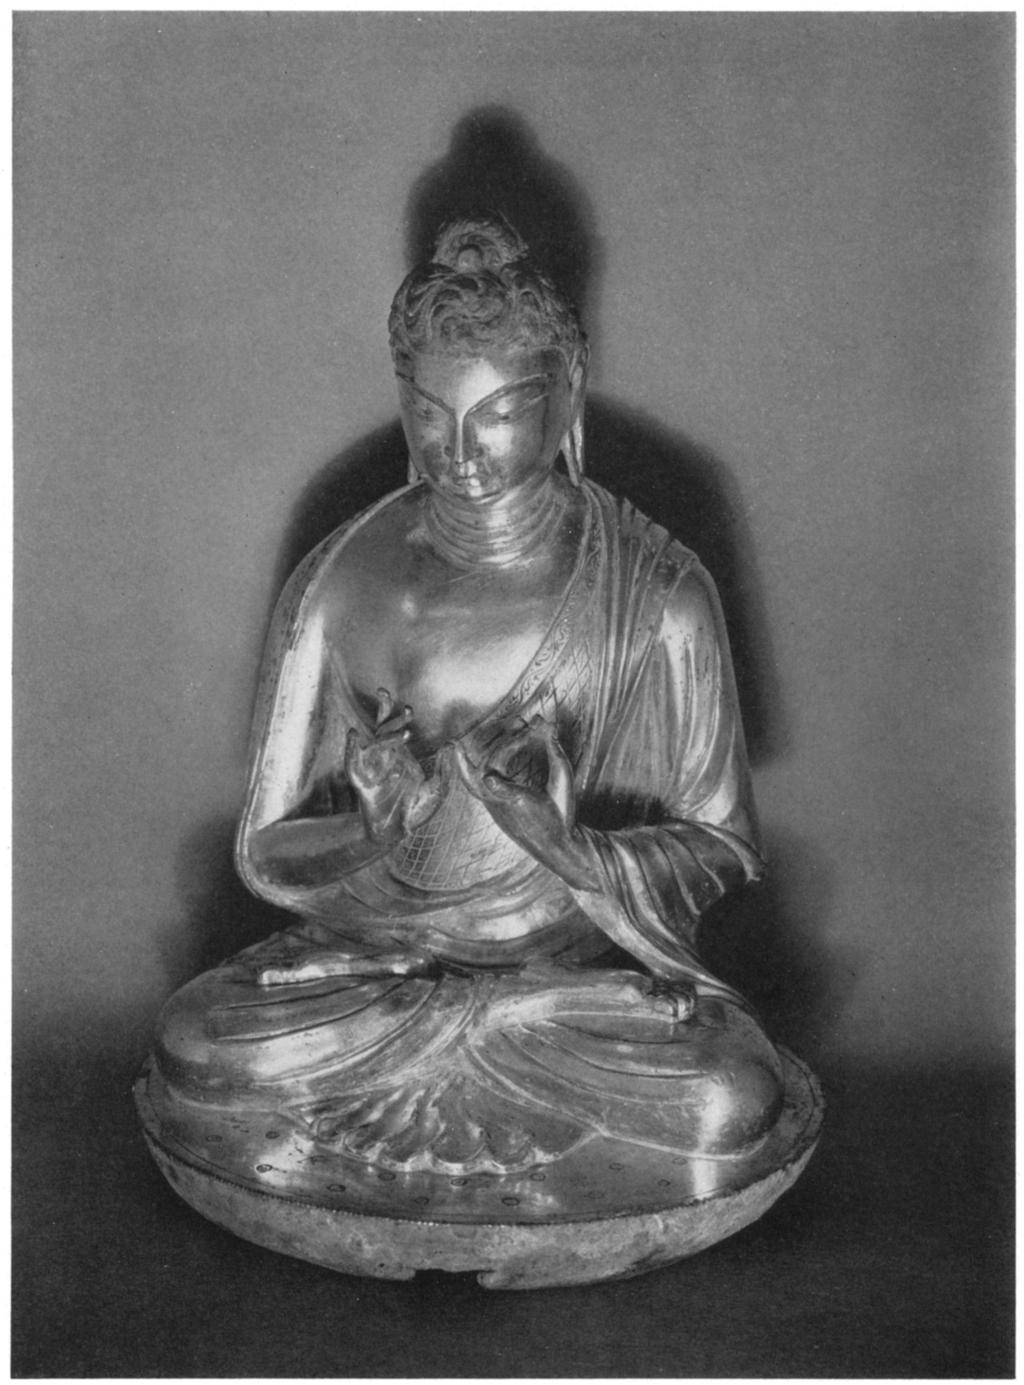 Gilt-bronze Buddha. Early T'ang dynasty, A.D. 6i8-907. Height 8 inches. Rogers Fund. Photograph by Charles Sheeler.